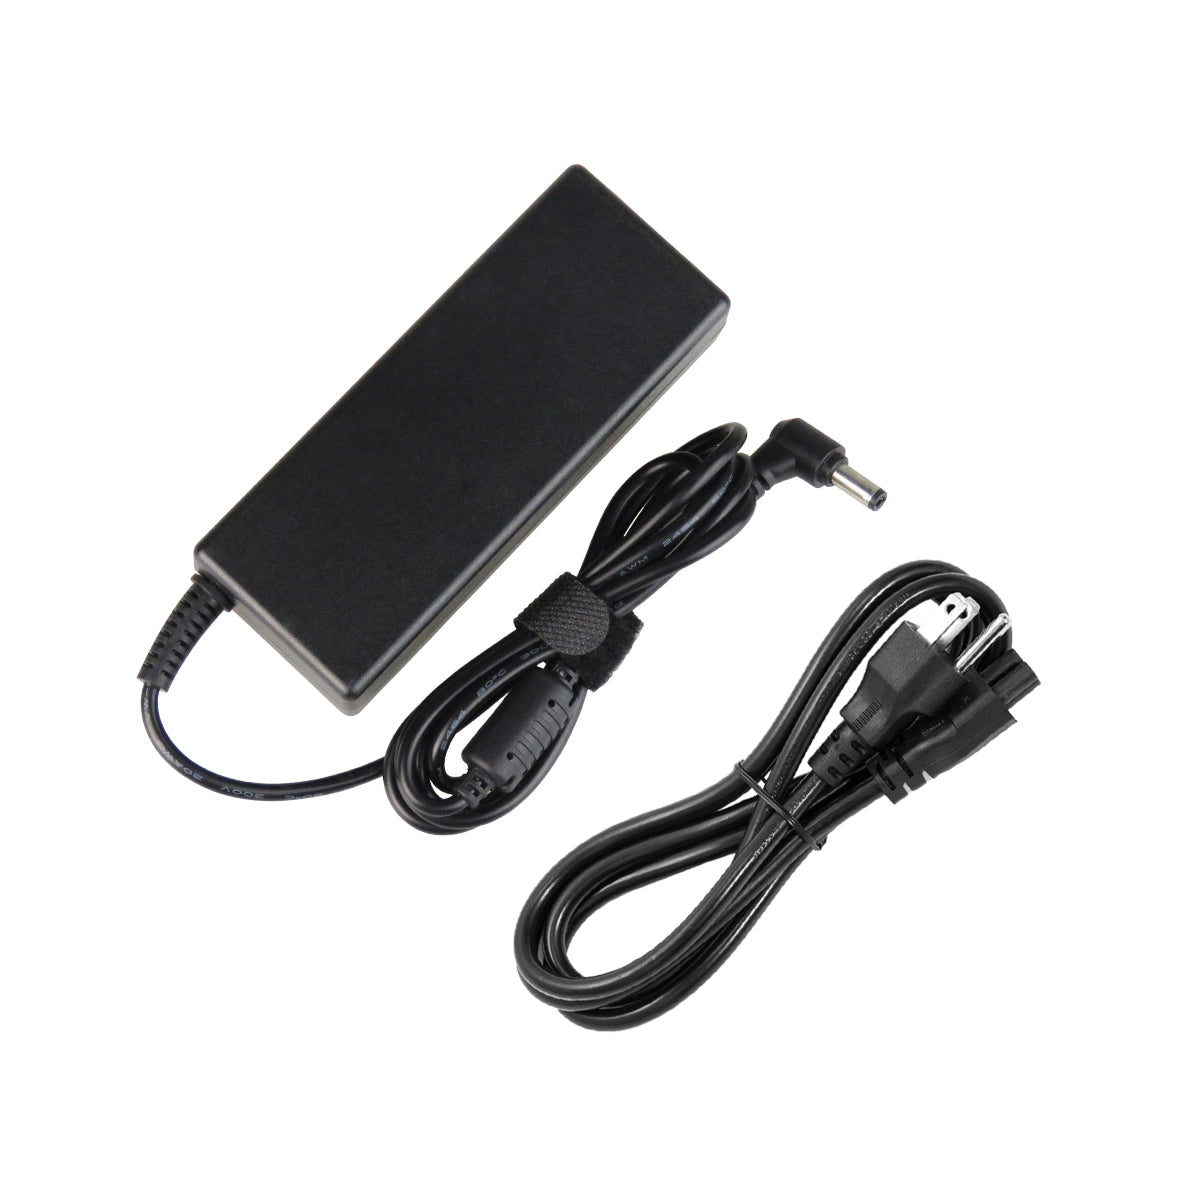 AC Adapter Charger for ASUS X52DR Notebook.